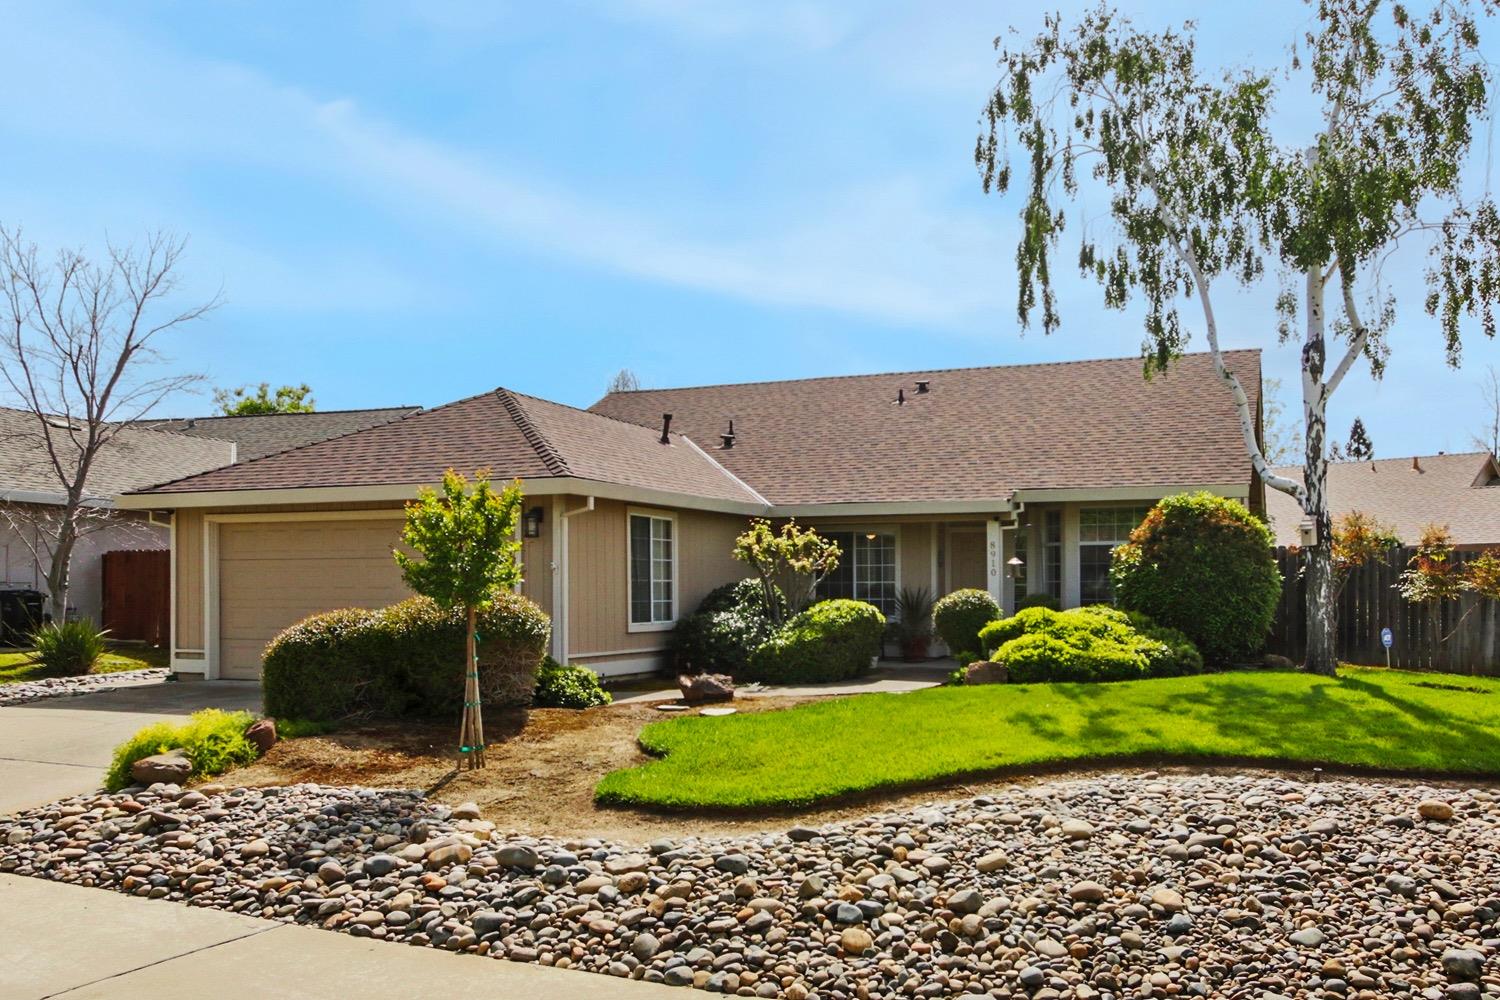 Photo of 8910 Willowspring Ct in Elk Grove, CA